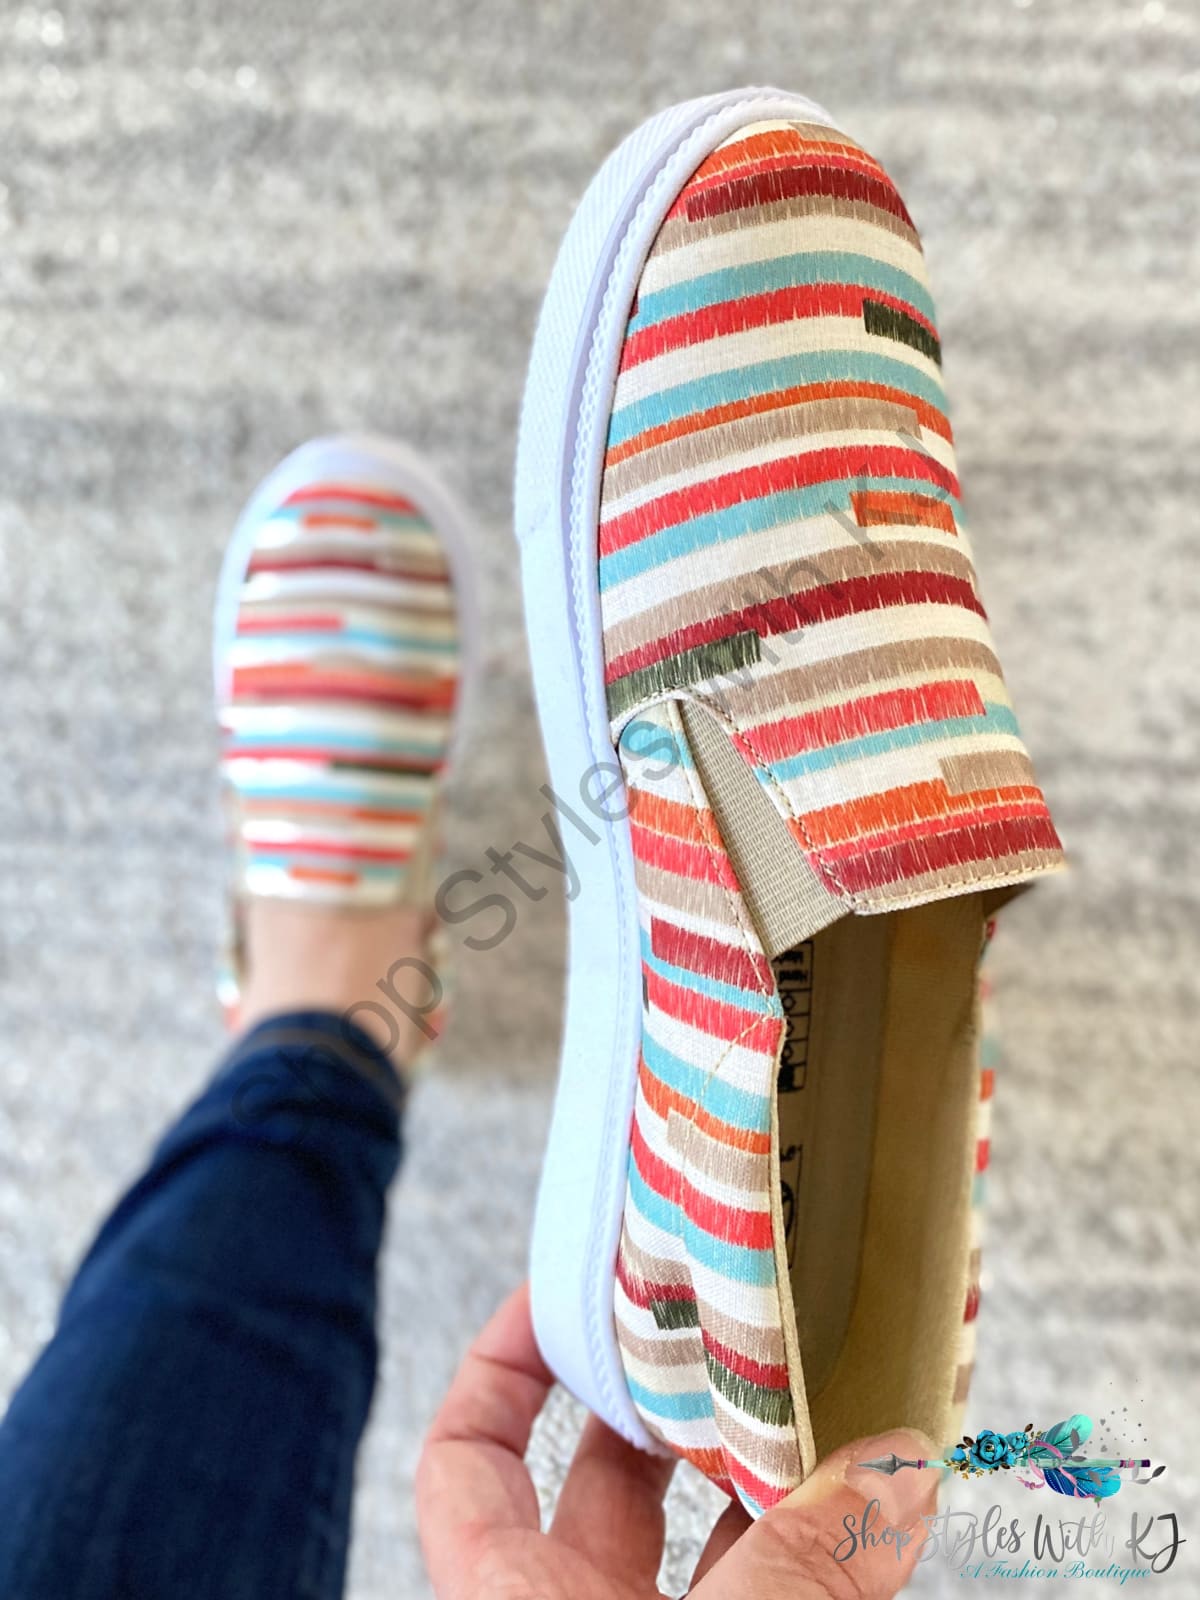 My Boho Striped Sneakers Ms-Everglades